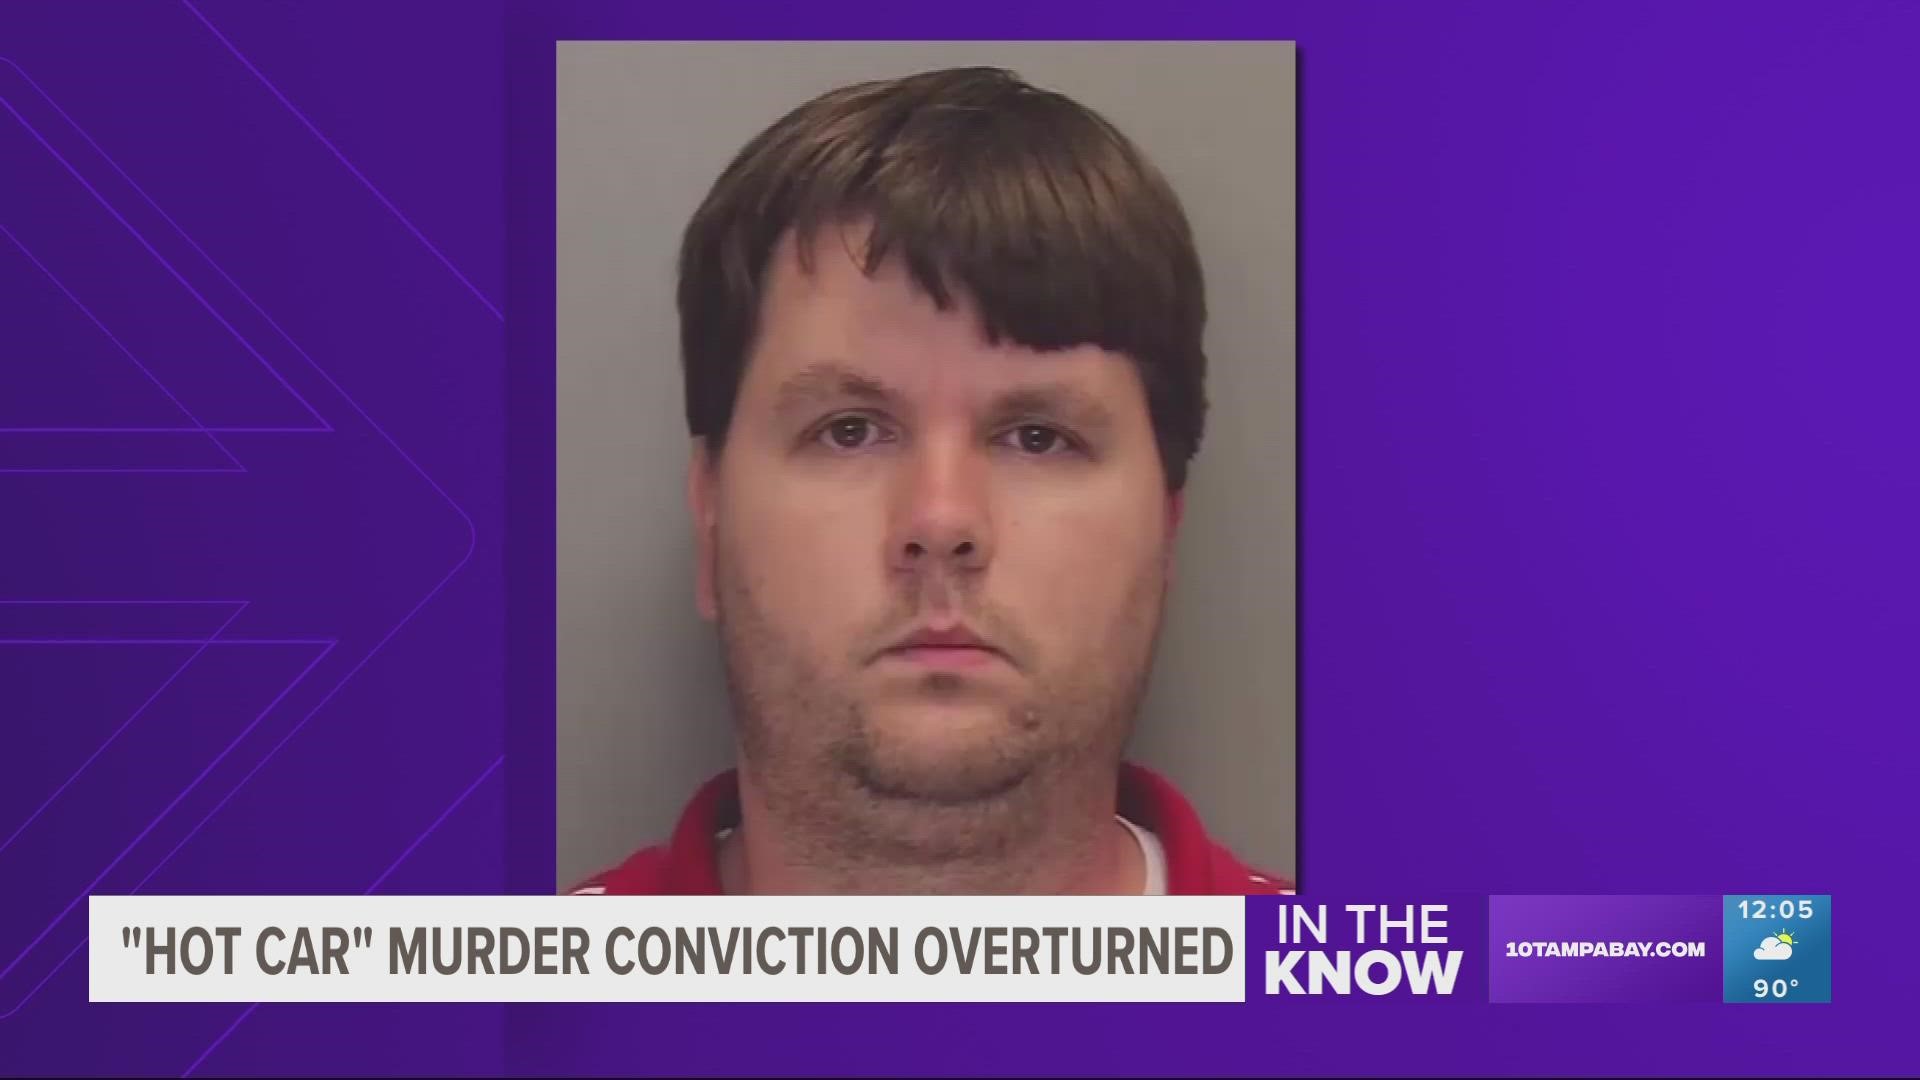 Justin Ross Harris, 41, was convicted in November 2016 on eight counts including malice murder in the death of his 22-month-old son, Cooper.